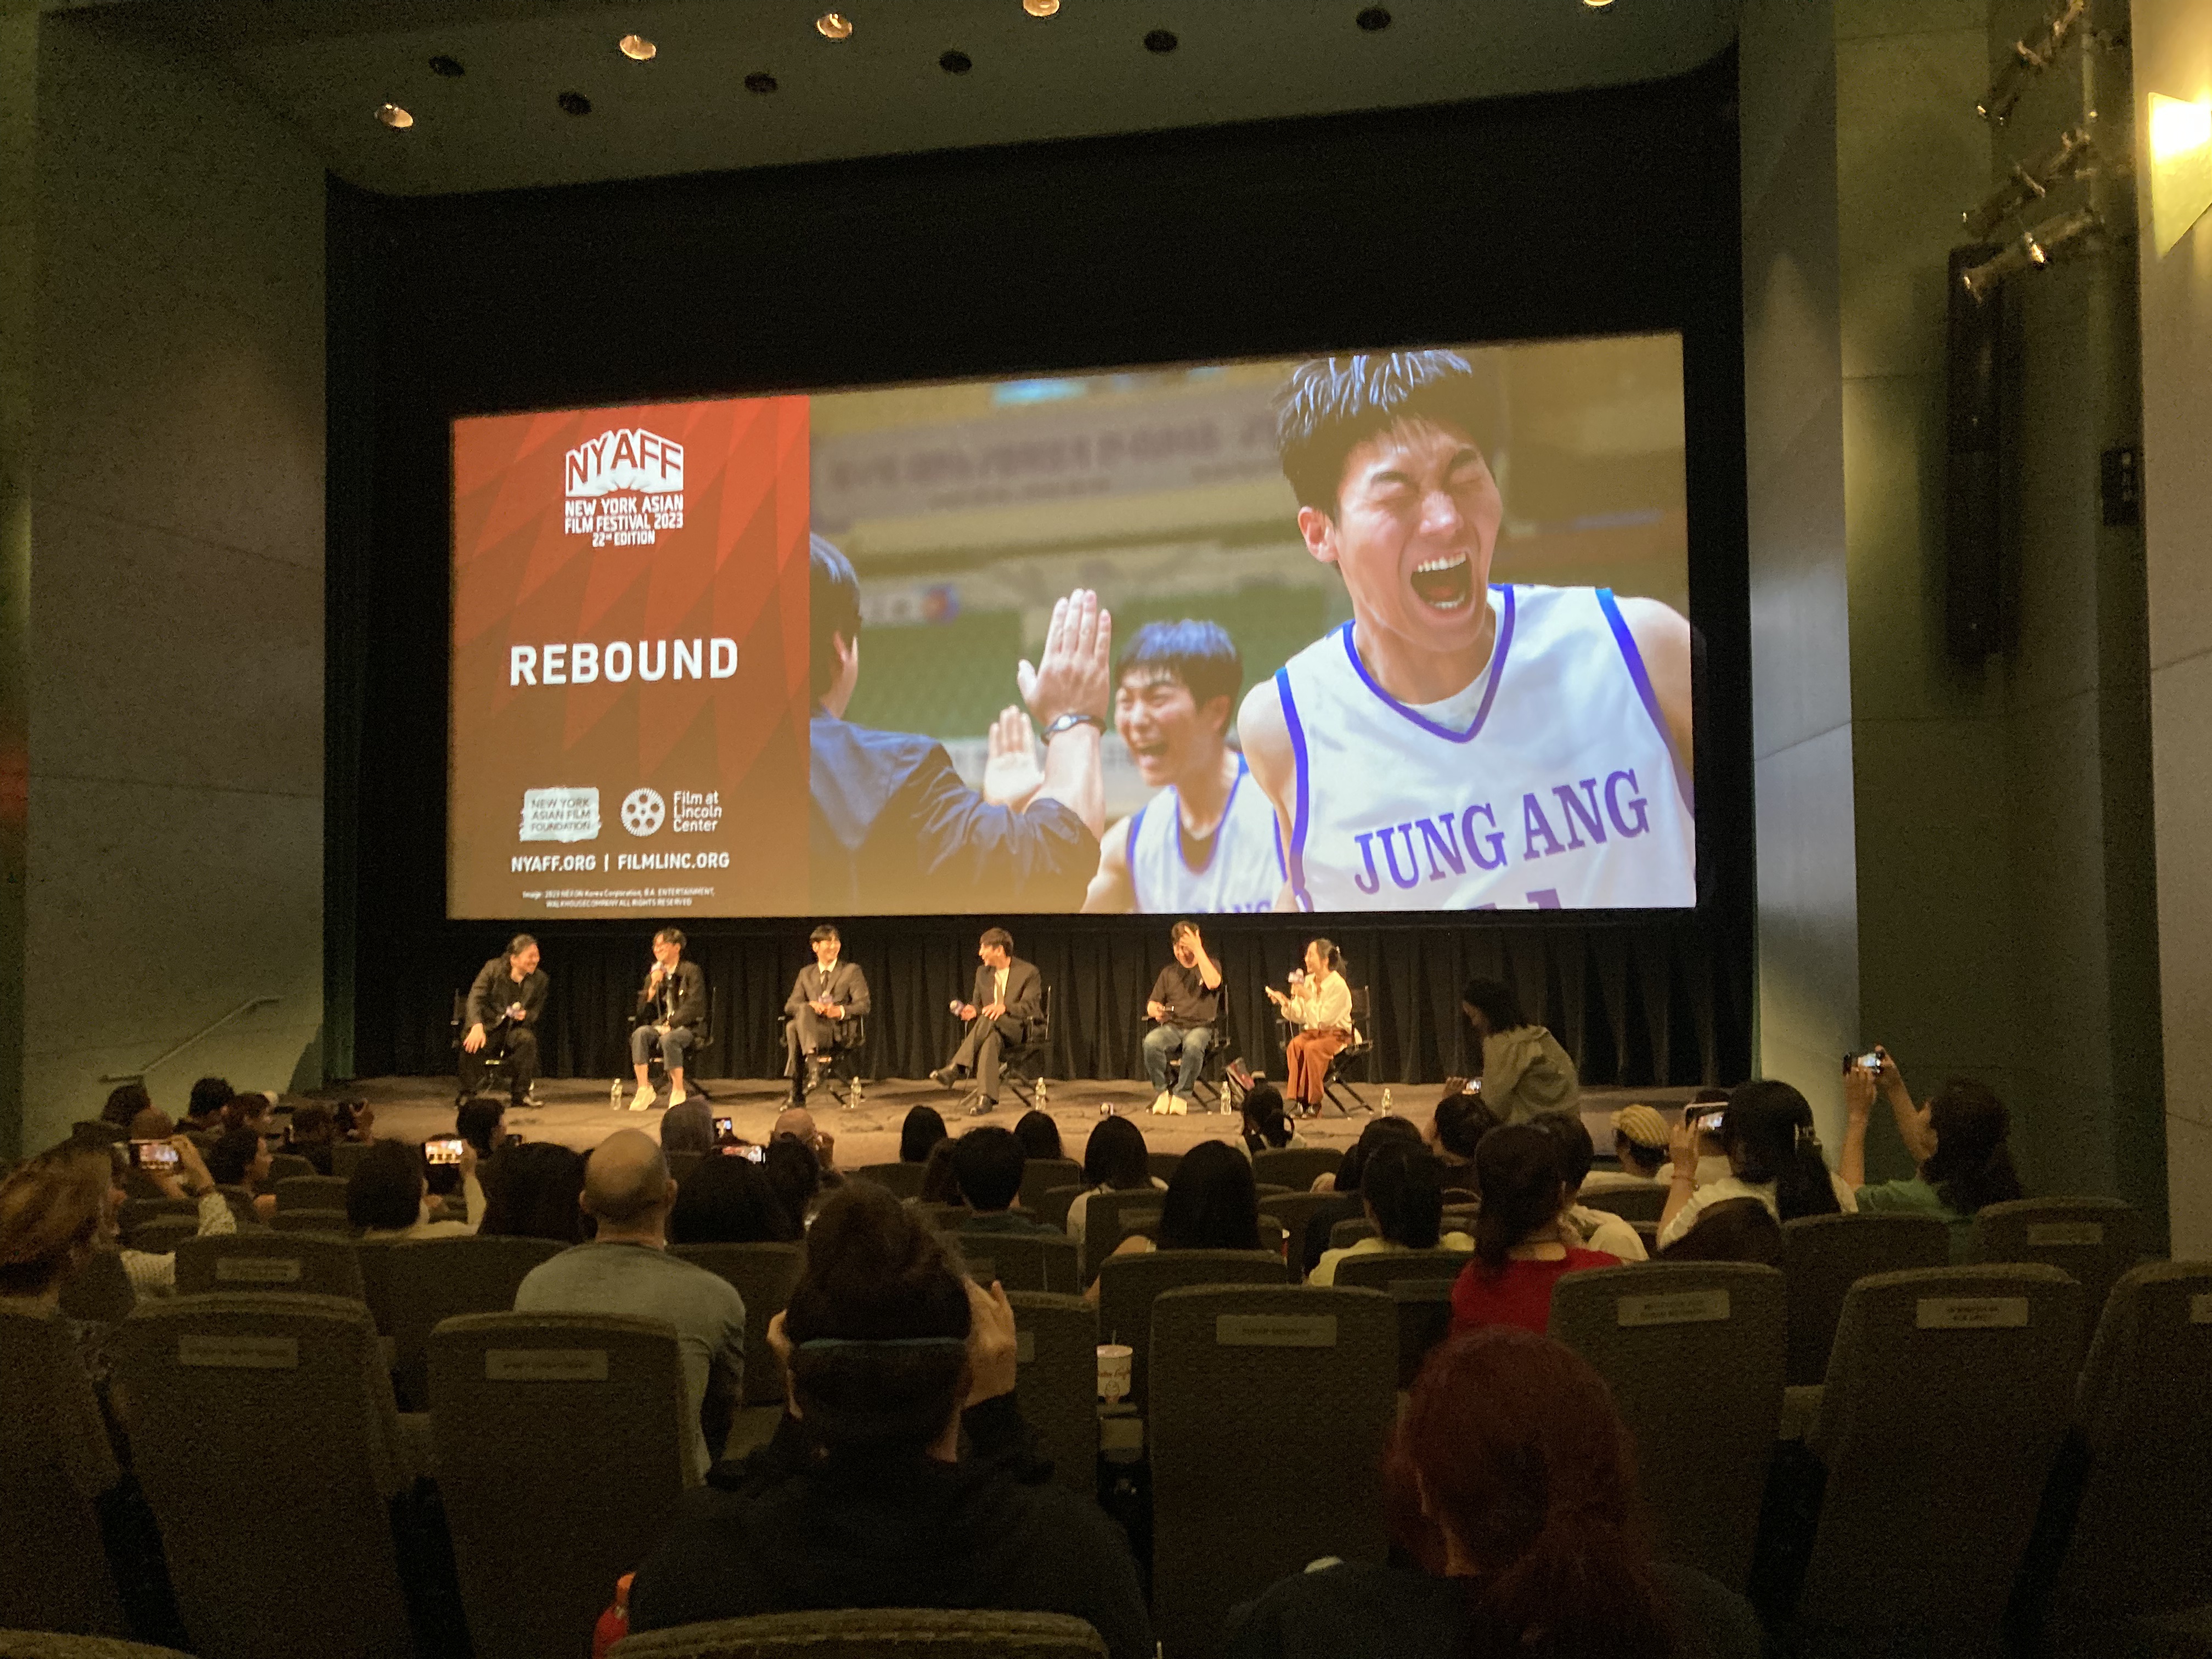 Director Chang Hang-ju, Producer Billy Acumen and Actors Jeong Jin-woon and Kim Taek do an audience Q&A following the screening of the New York premiere of their film, Rebound, at The 2023 New York Asian Film Festival at Lincoln Center.